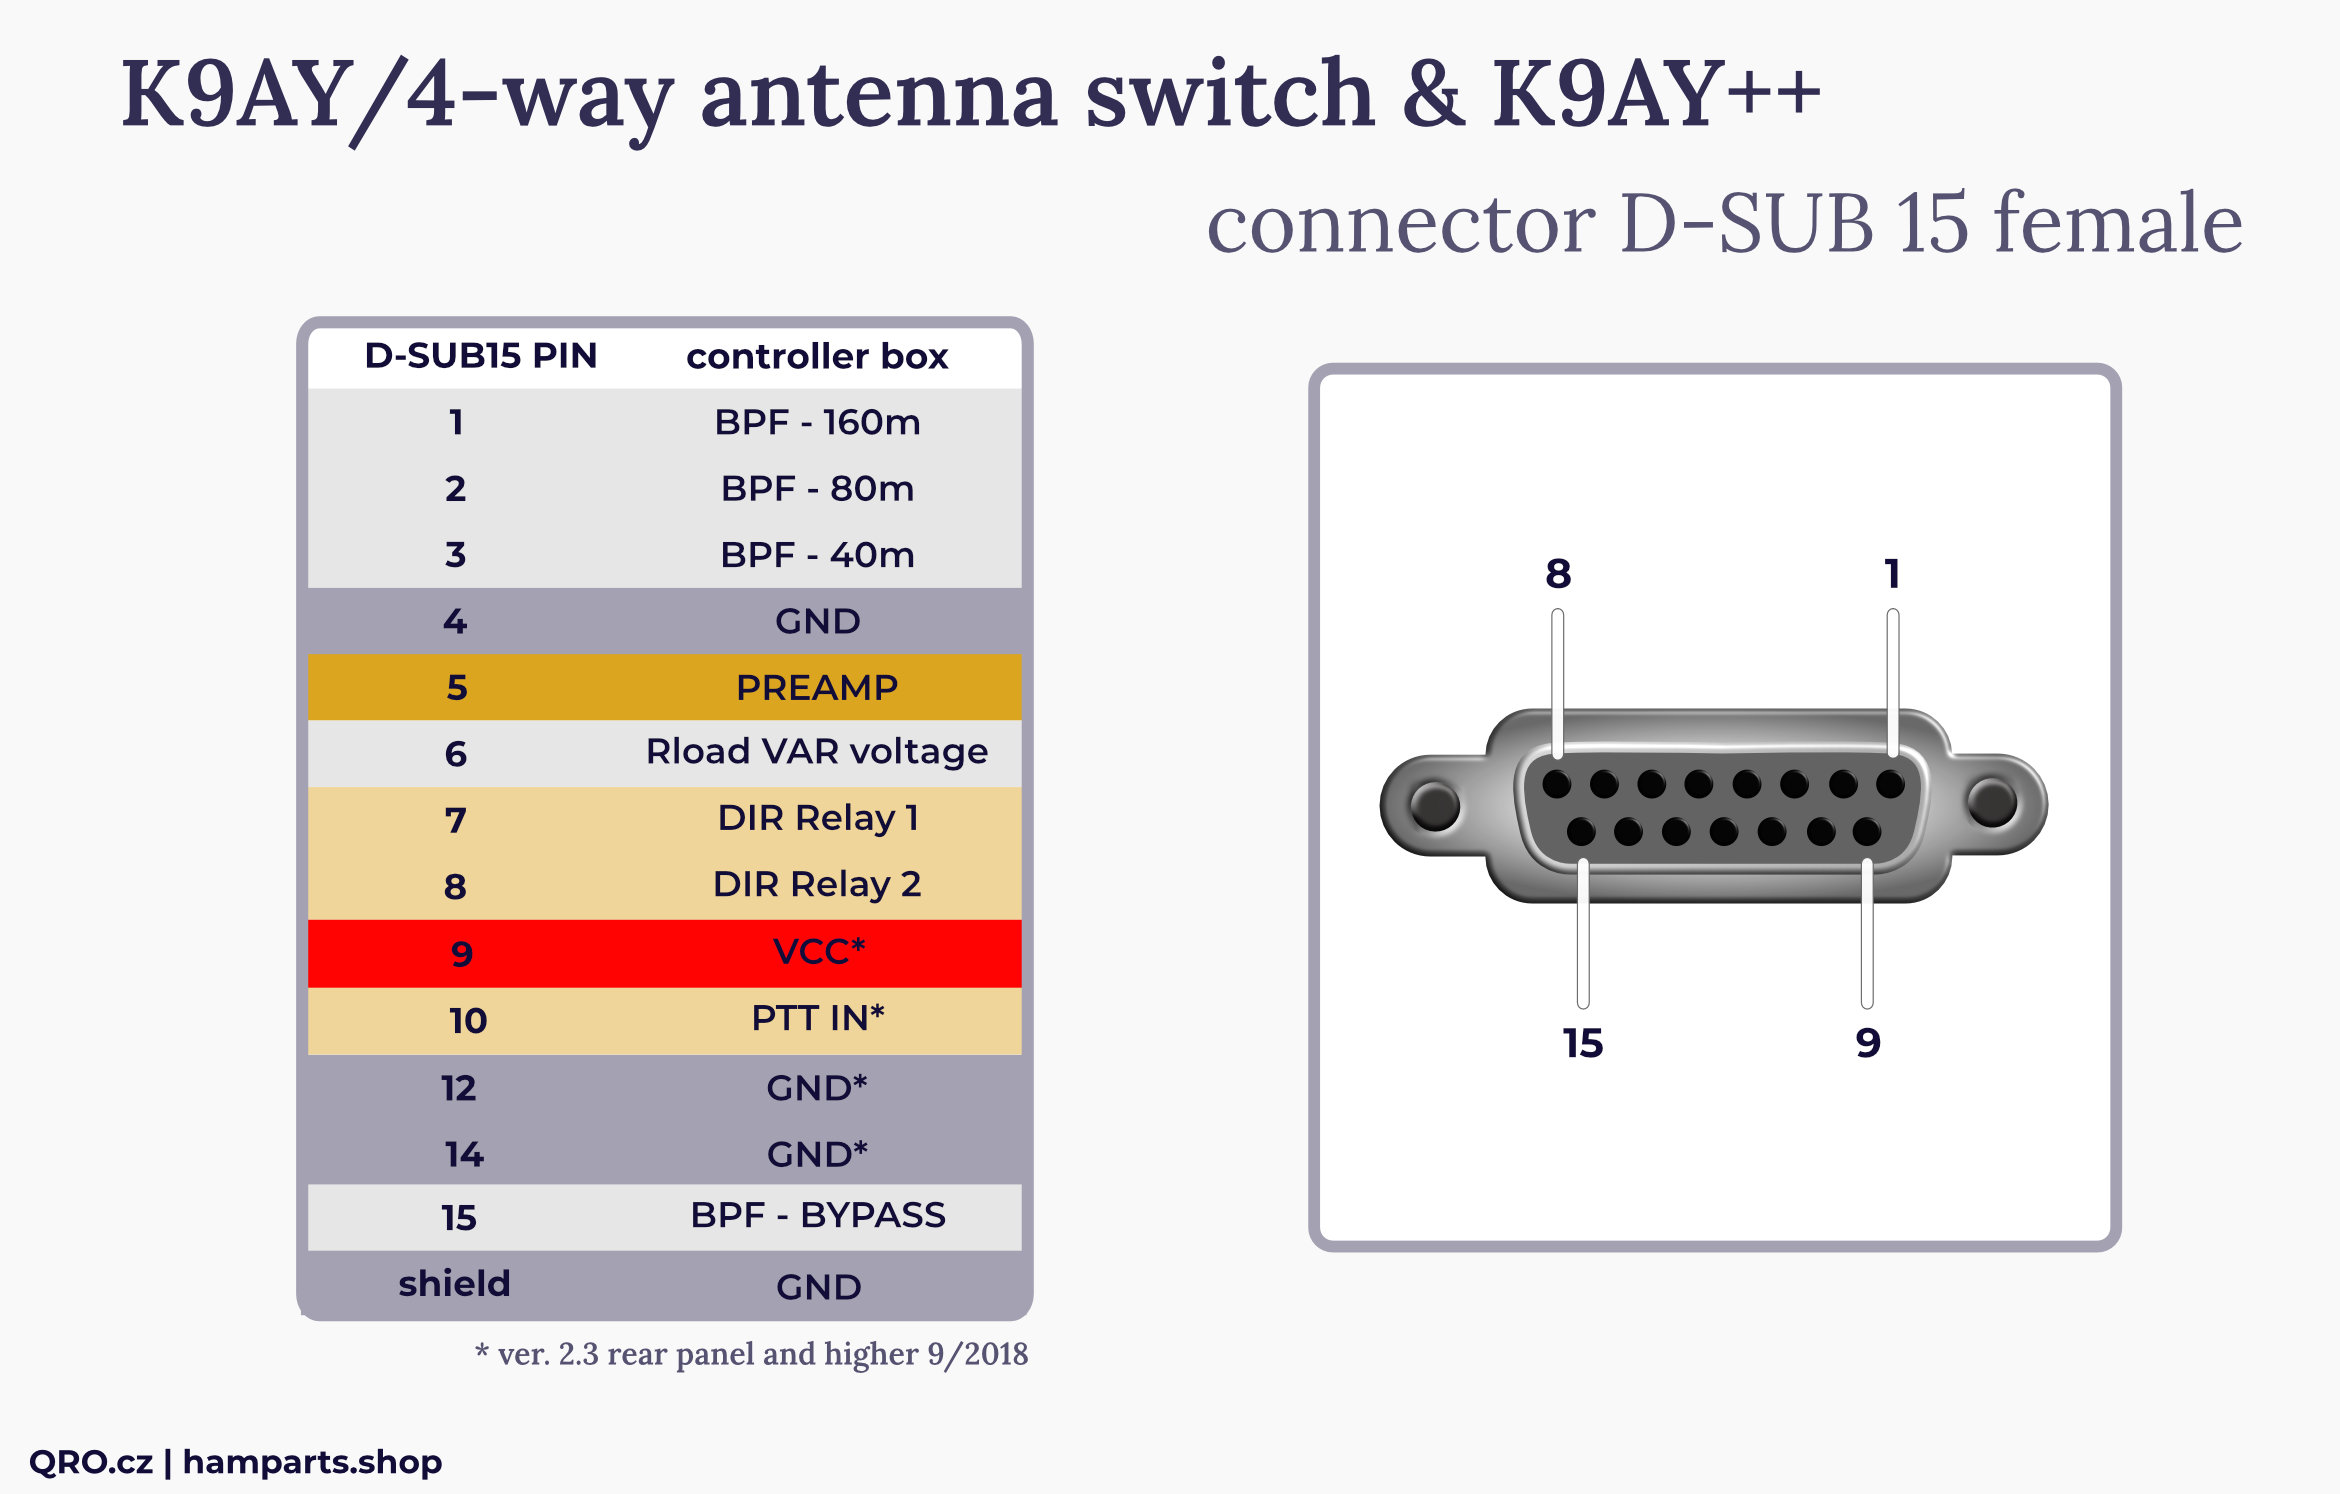 k9ay 4-way antenna switch controller connector d-sub15 qro.cz hamparts.shop